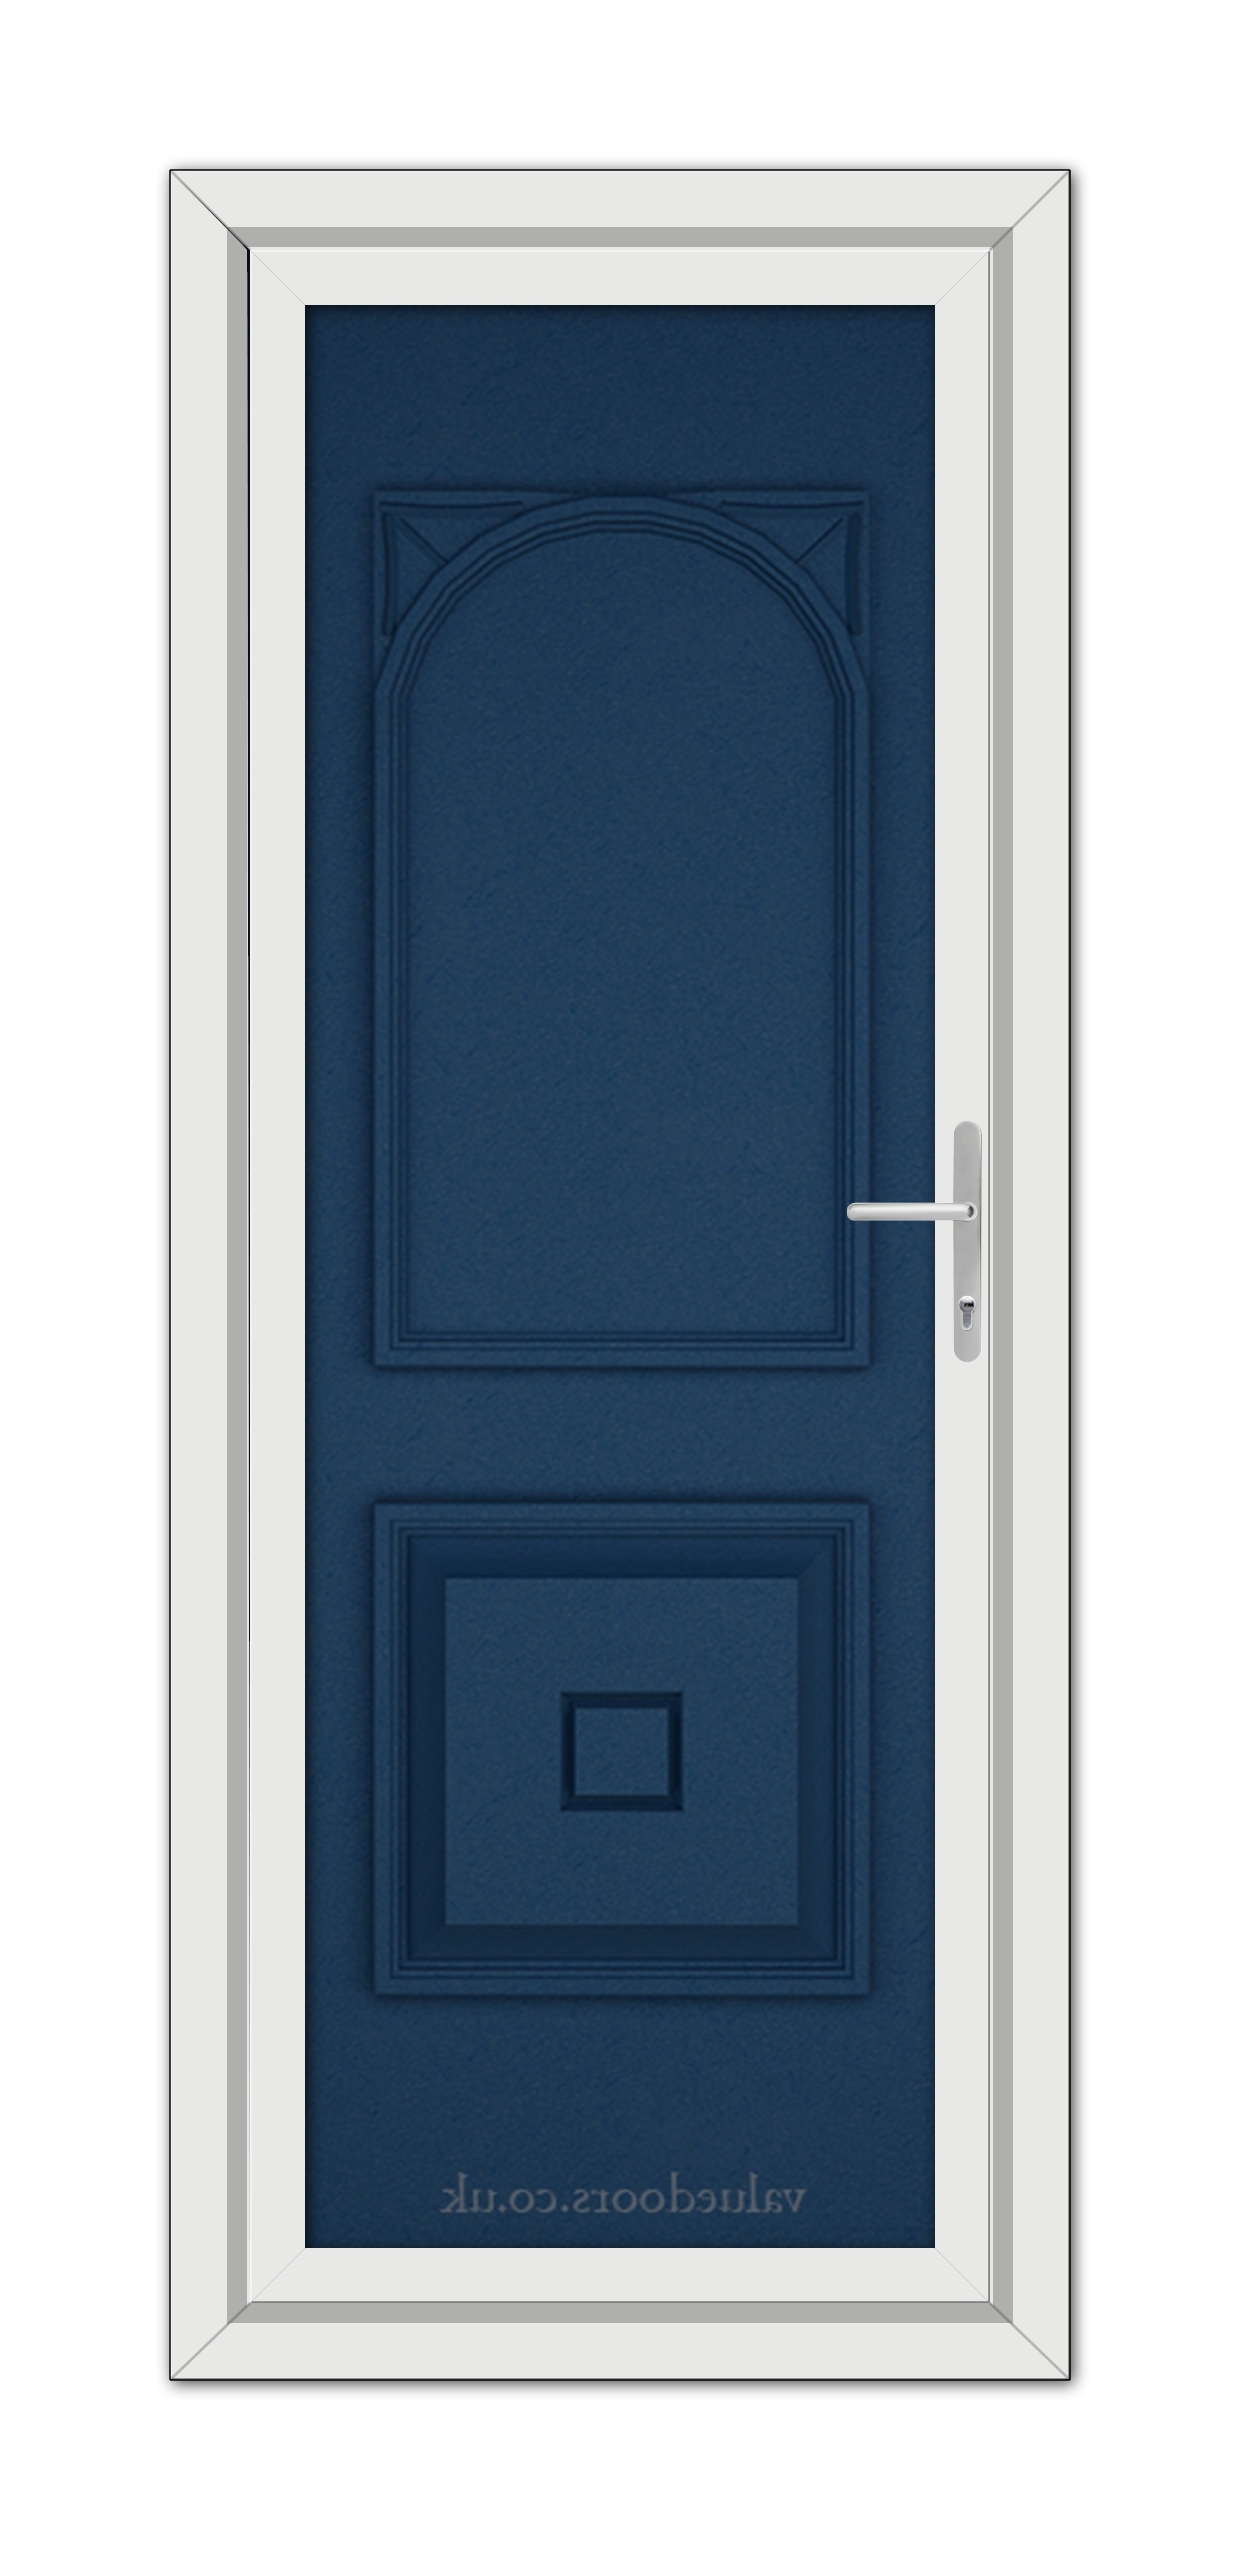 A Blue Reims Solid uPVC Door with a vertical arched panel at the top and a rectangular panel at the bottom, set within a white door frame.